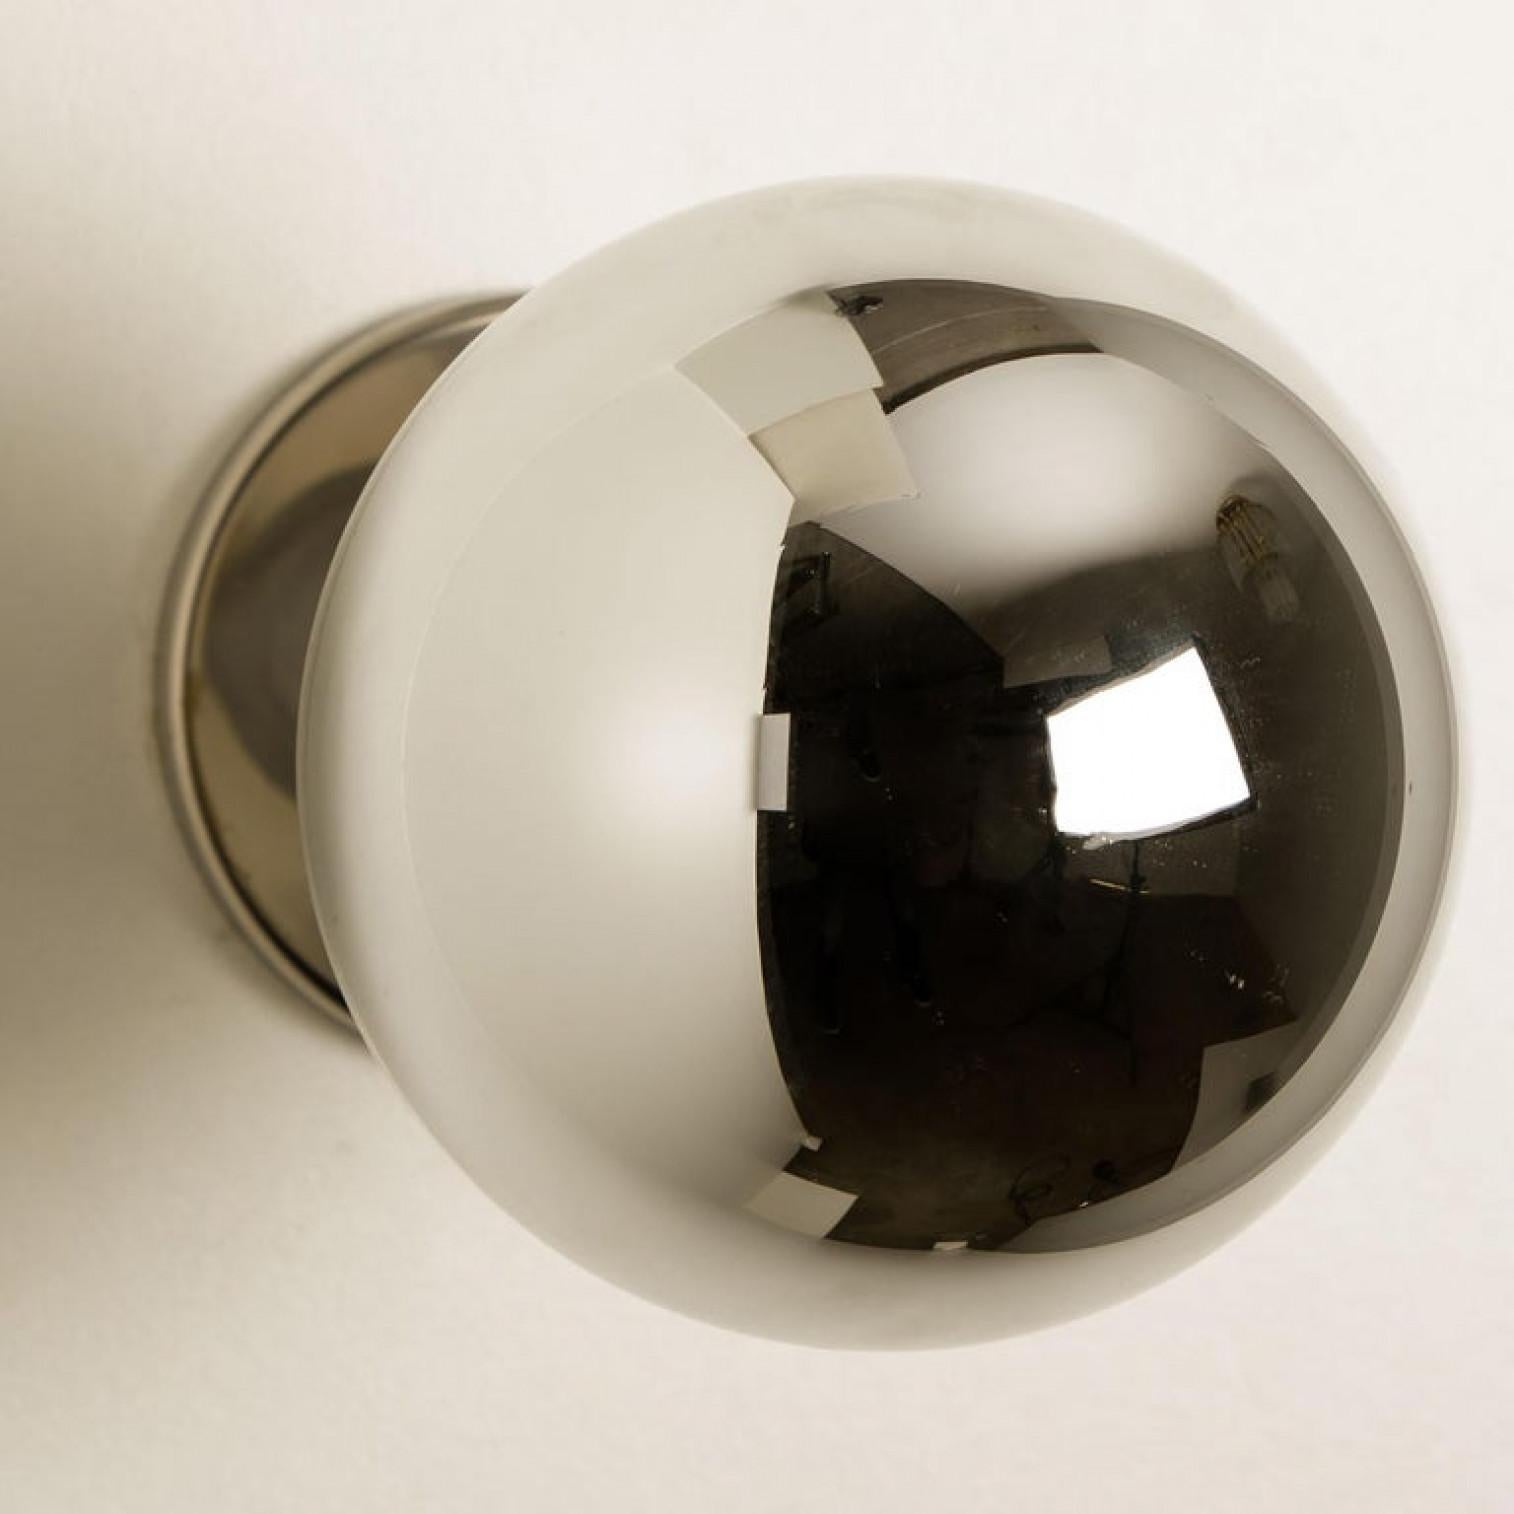 Chrome One of the Six Wall Lamps/ Flush Mounts  by Motoko Ishii for Staff, 1970s For Sale